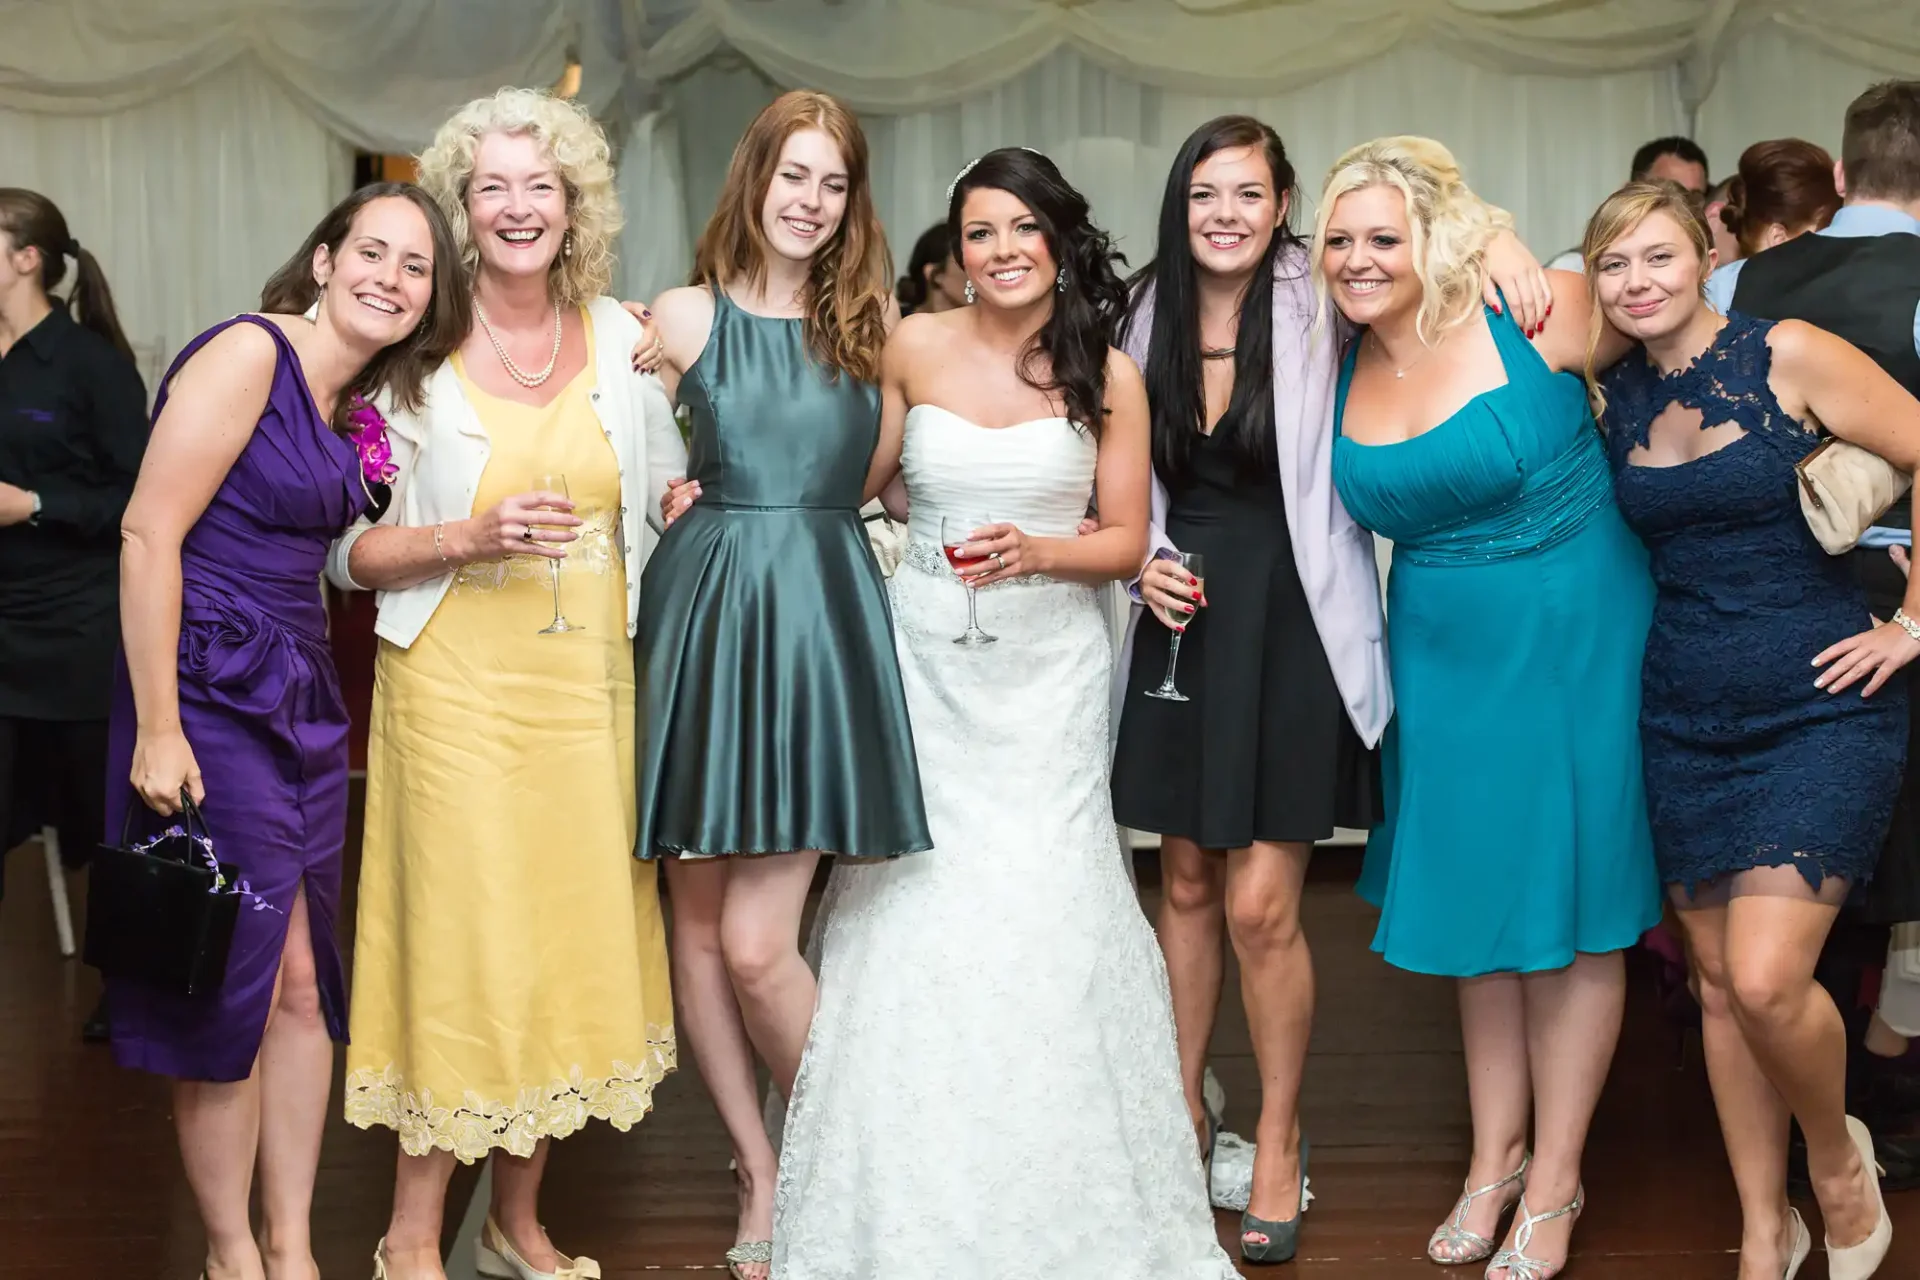 Six women posing for a photo at a wedding reception, smiling and holding champagne glasses, with one in a bridal gown.